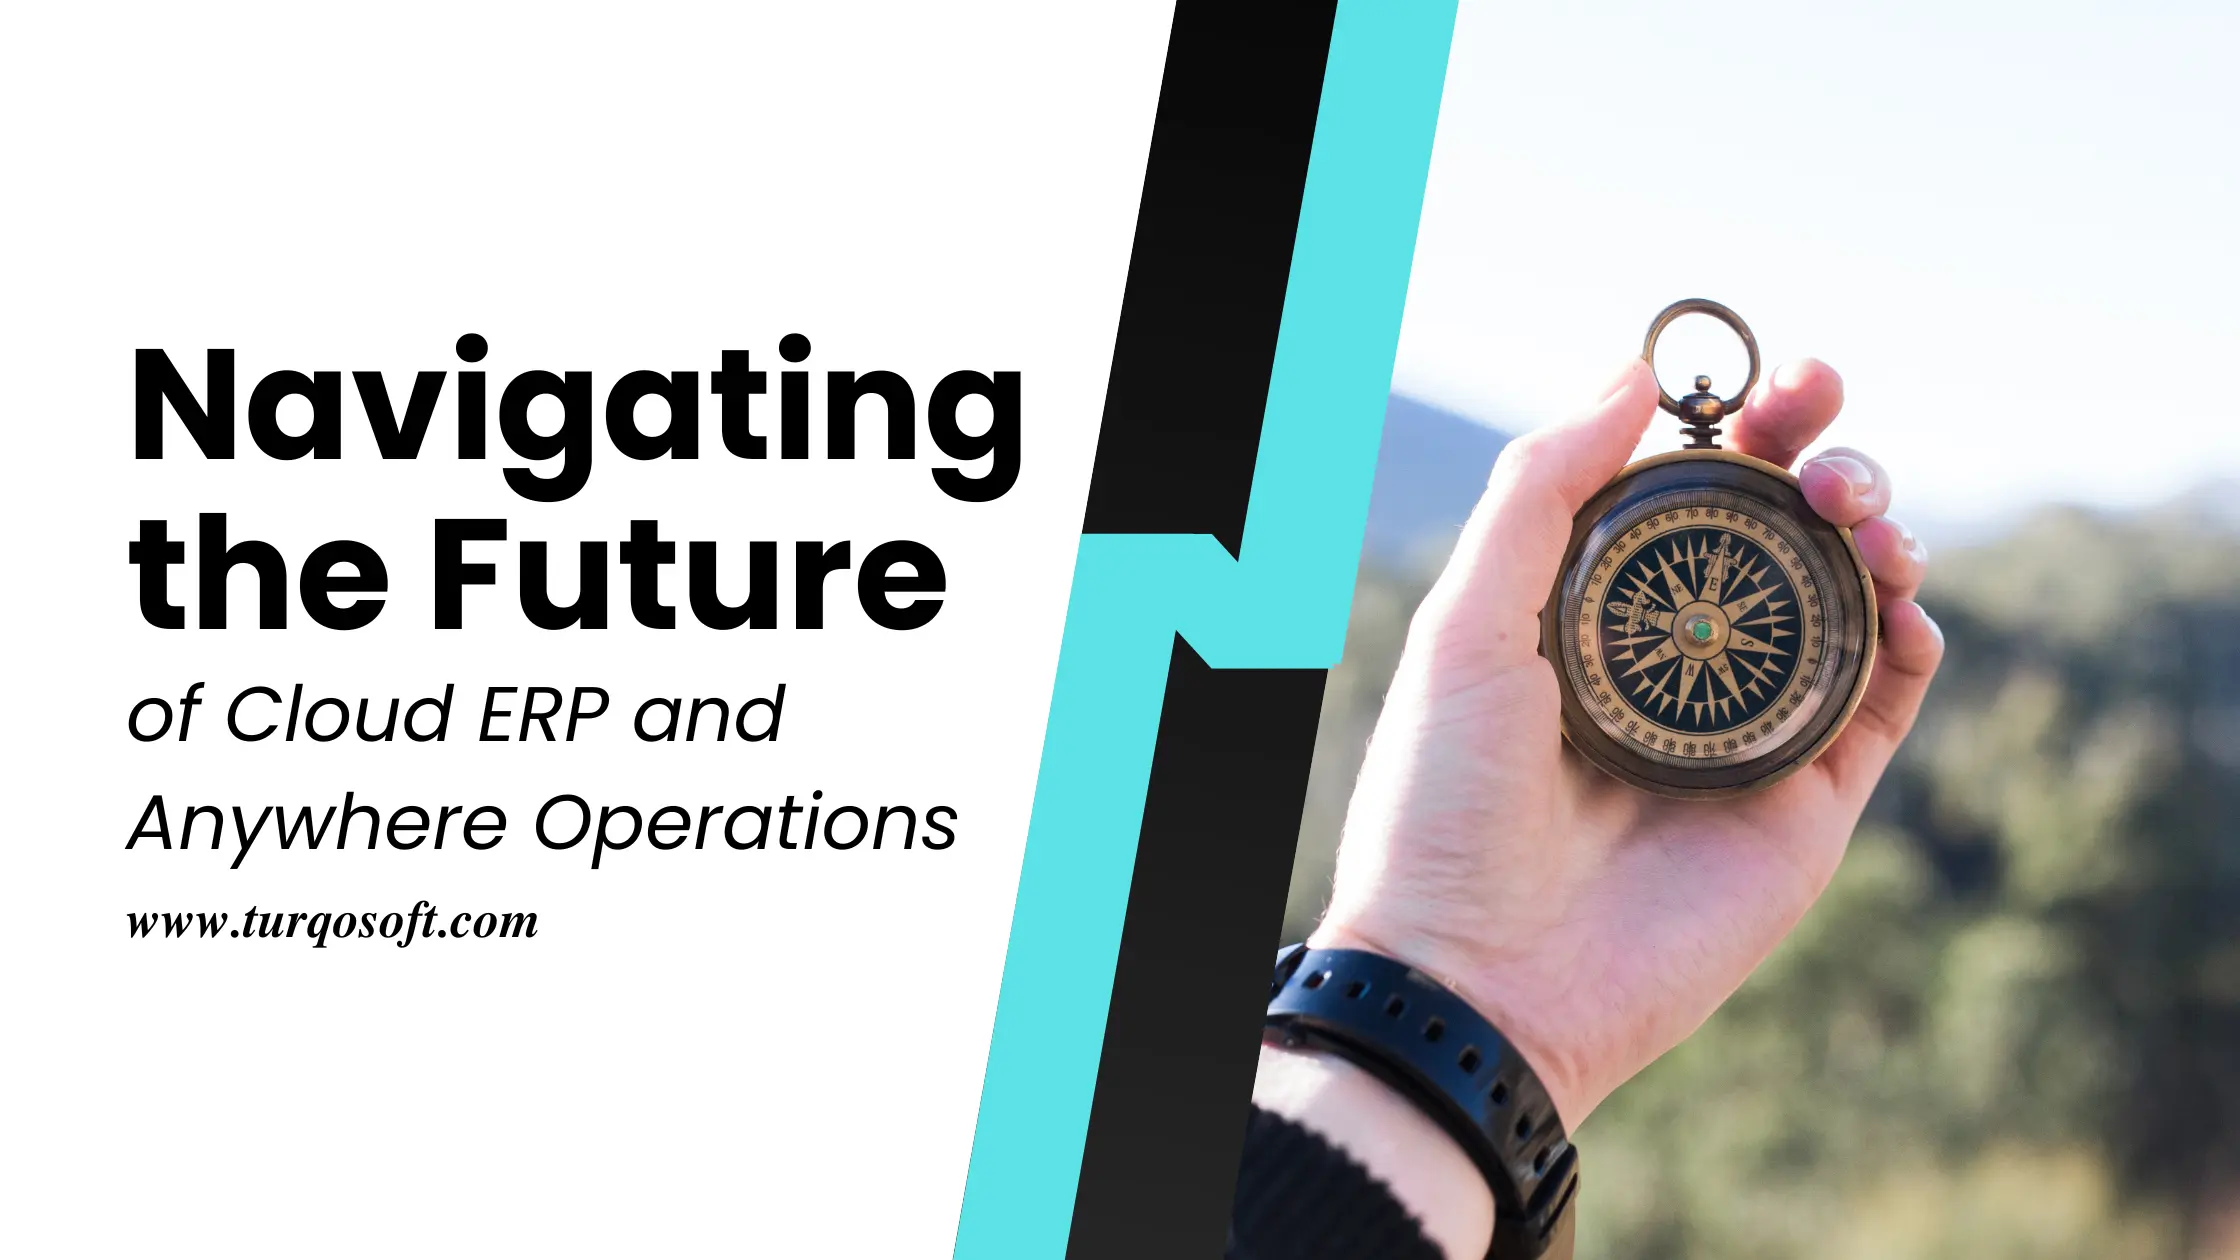 Navigating the Future of Cloud ERP and Anywhere Operations